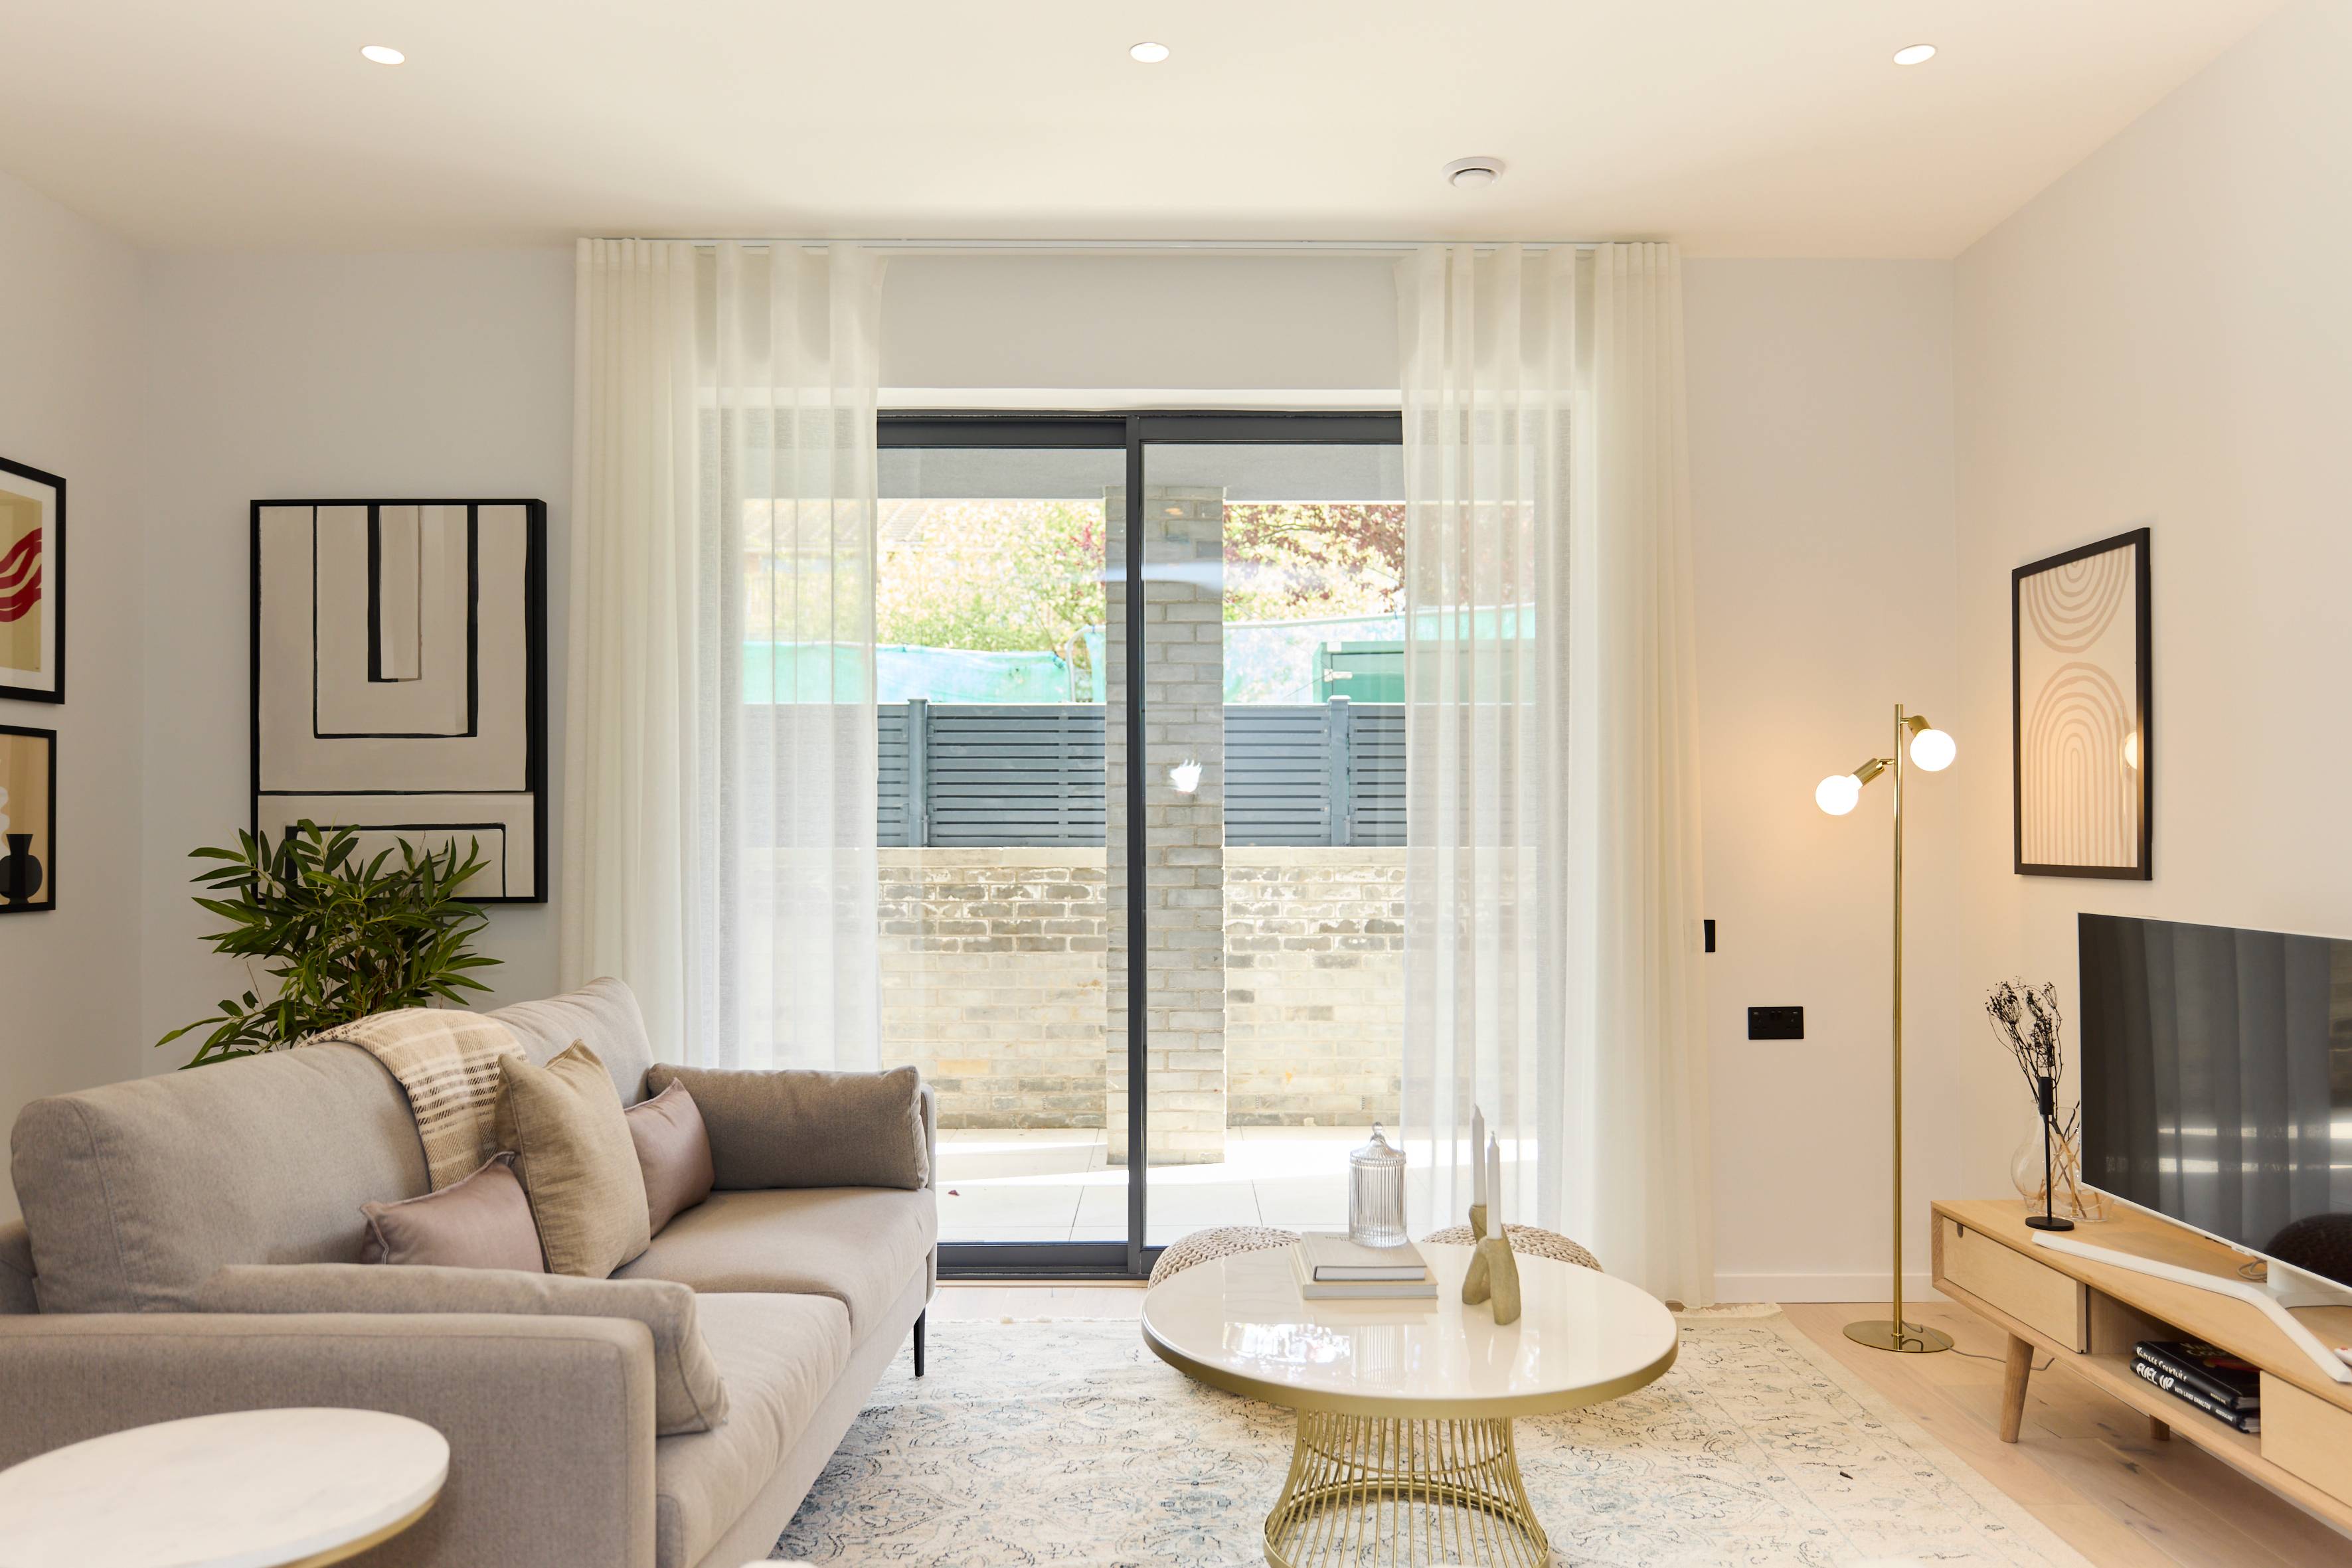 Modern City Living with this Brand-New One-Bedroom Apartment in vibrant North-West London